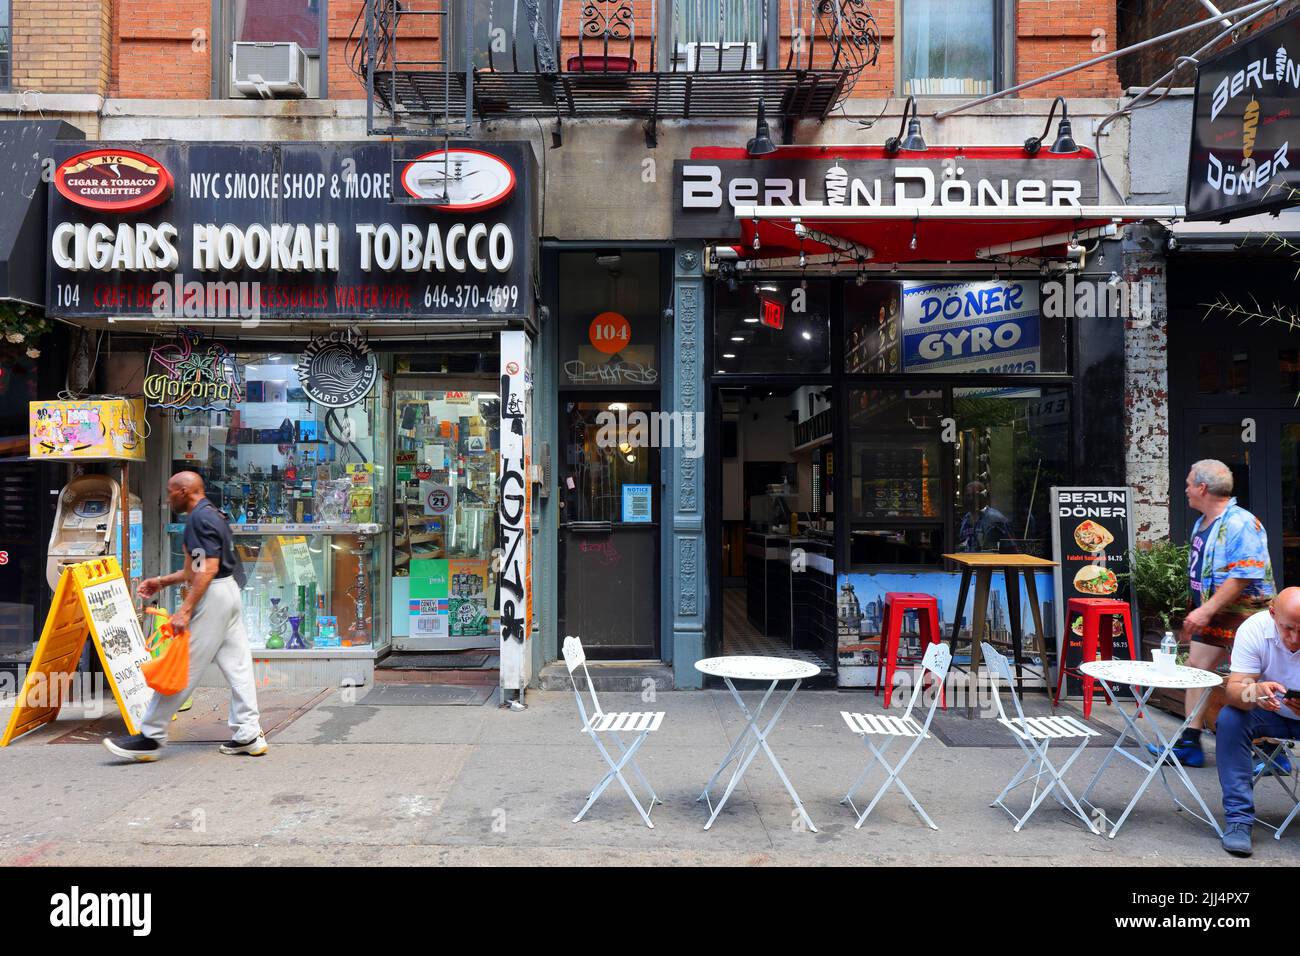 Berlin Doner, smoke shop, 104 MacDougal St, New York, NY. exterior storefront of an eatery in Manhattan's Greenwich Village neighborhood. Stock Photo